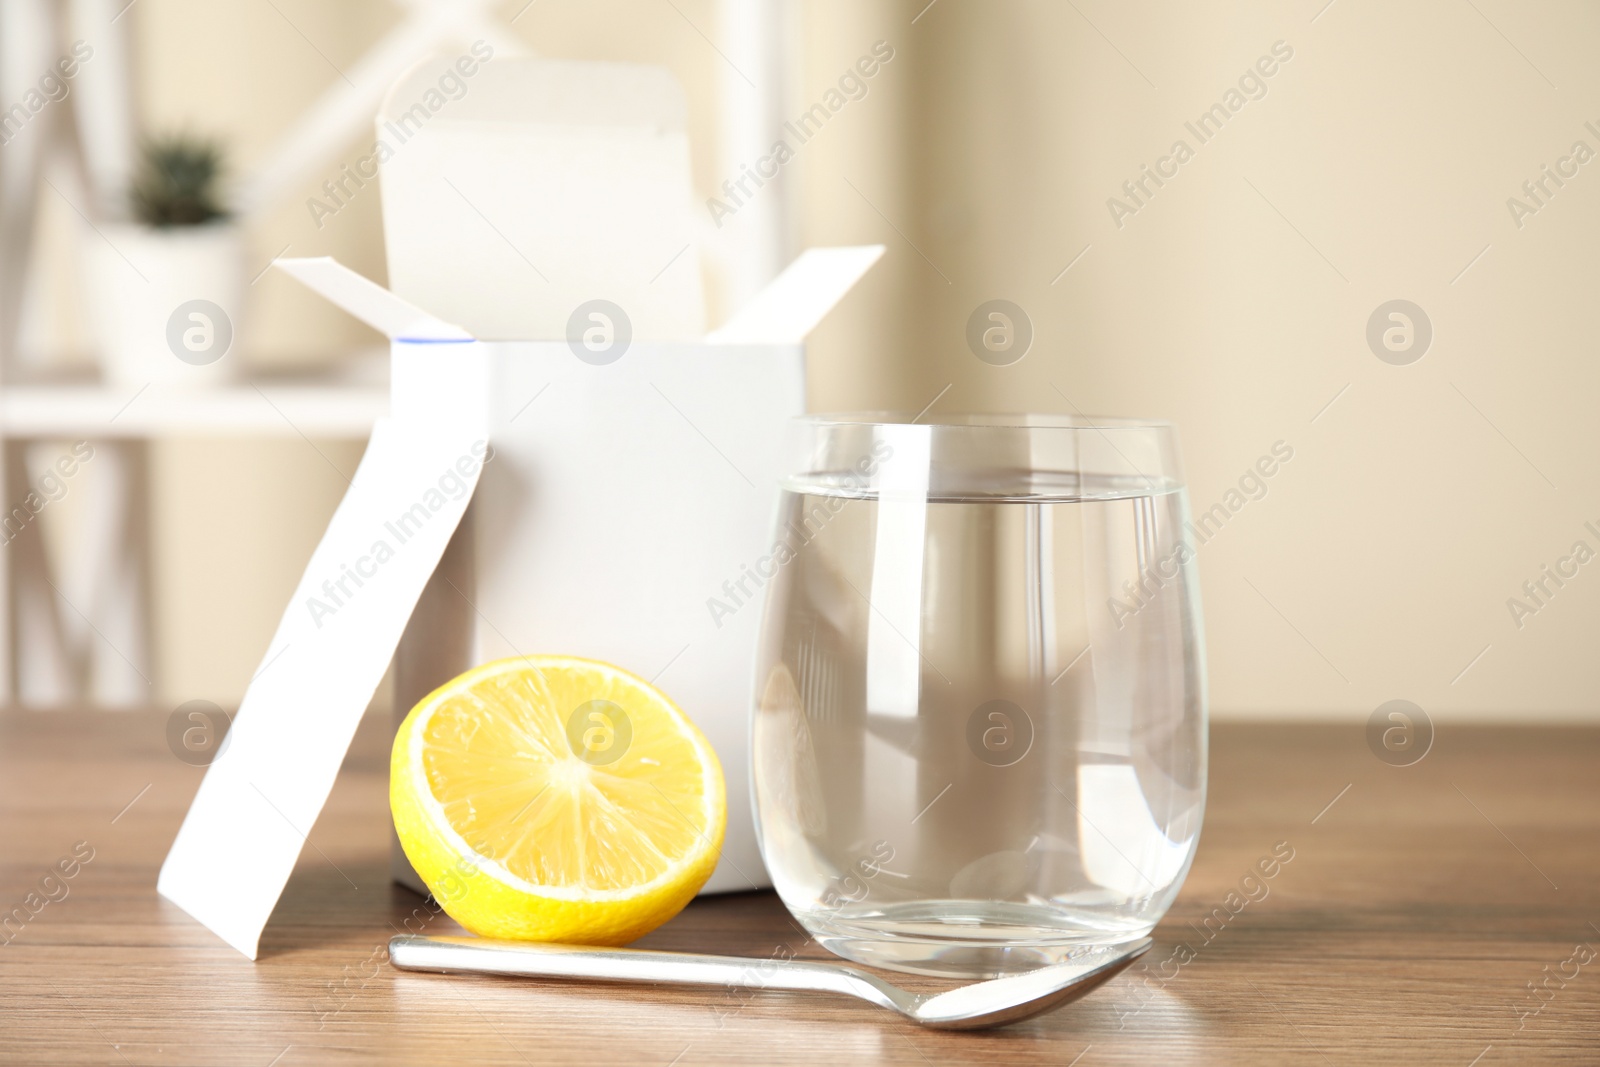 Photo of Medicine sachet, glass of water, spoon and lemon on wooden table